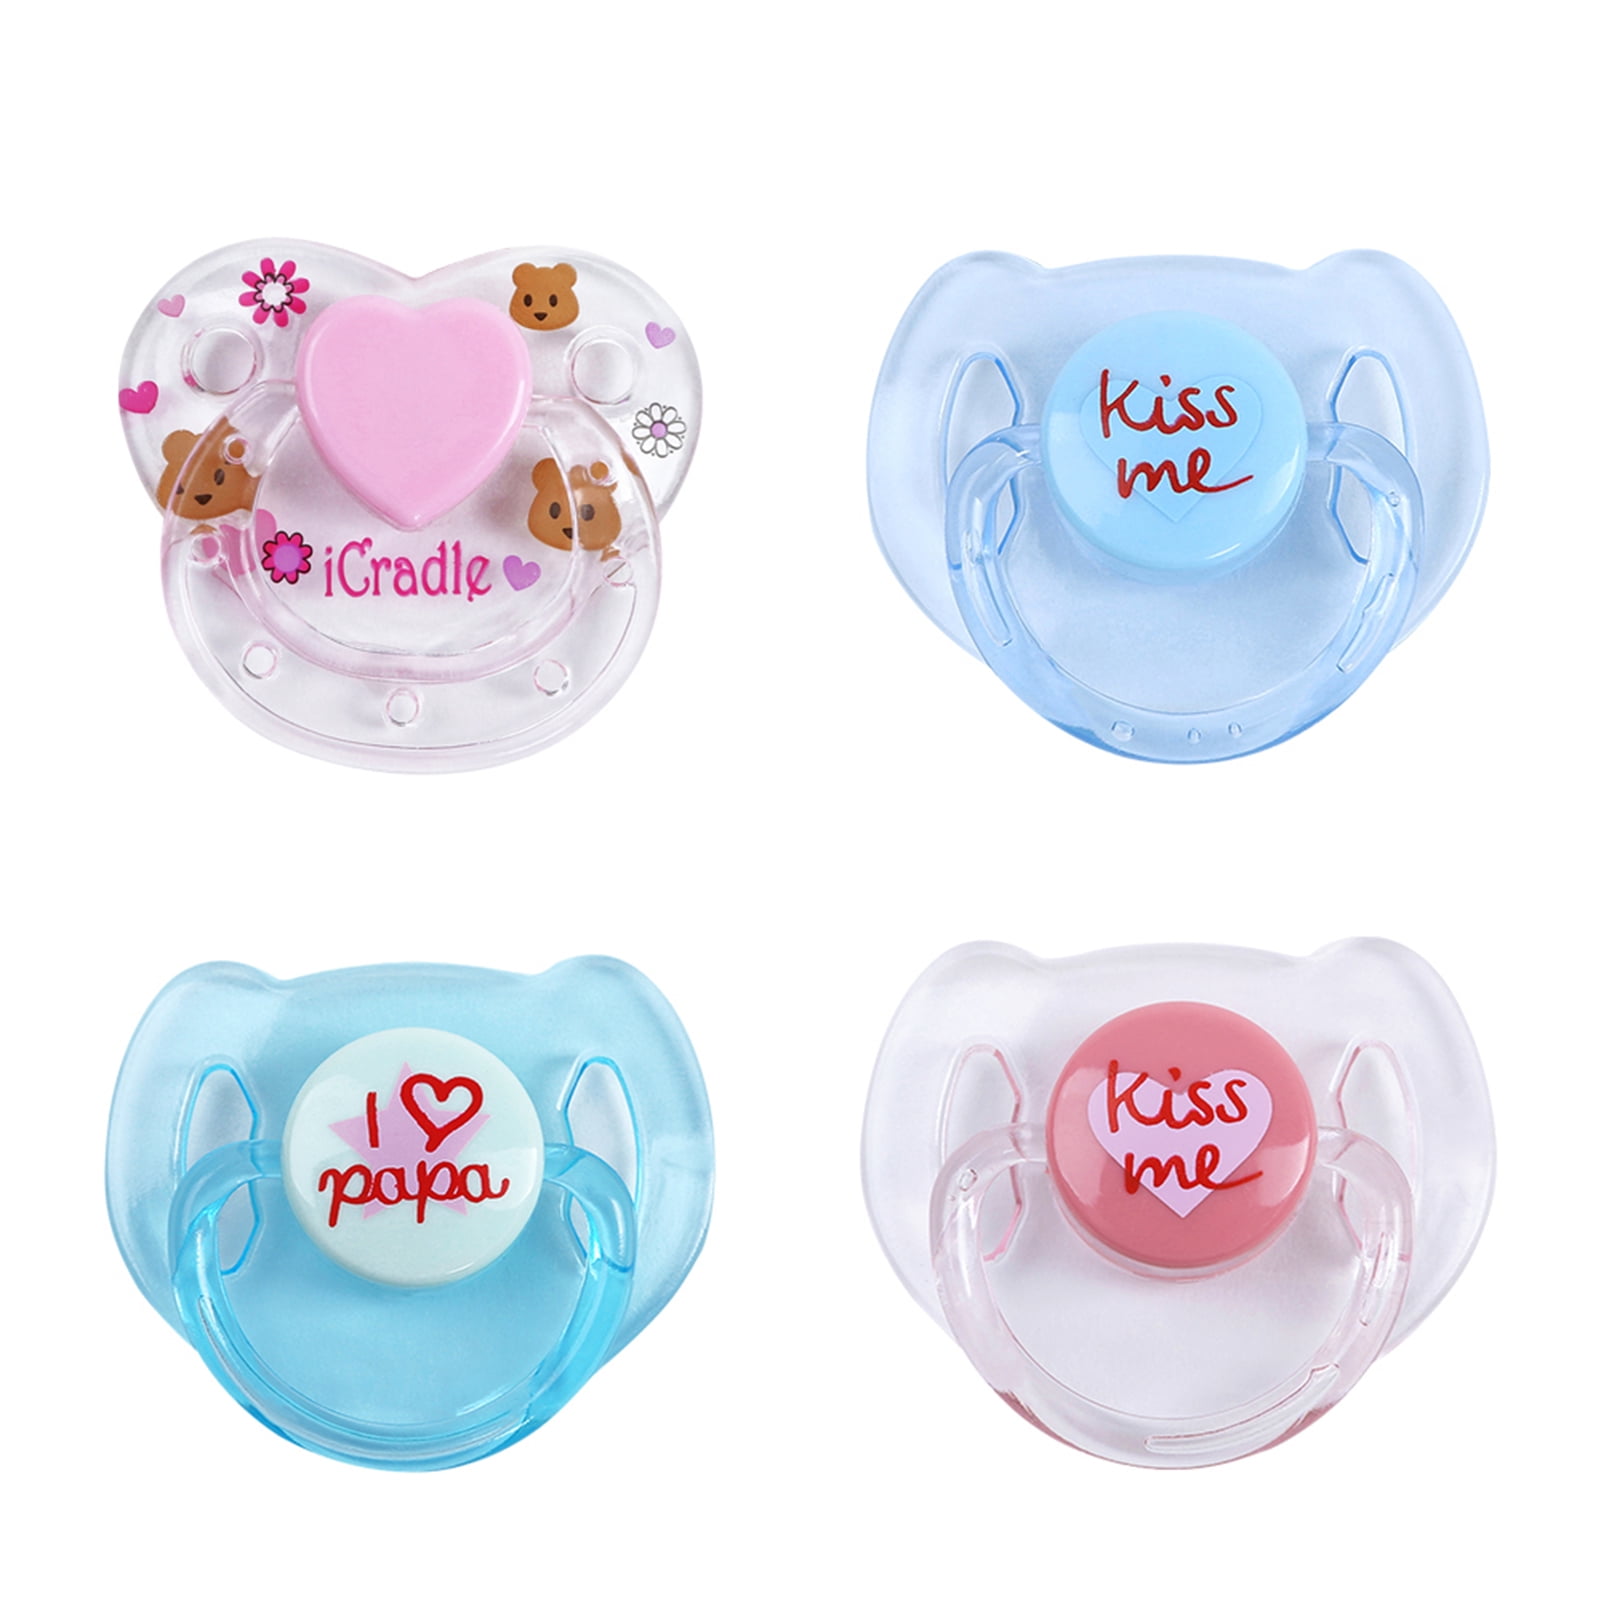 2021 Cute Tiny Pacifier Dummy Fit Reborn Baby Dolls Pink Blue Colors Accessories 